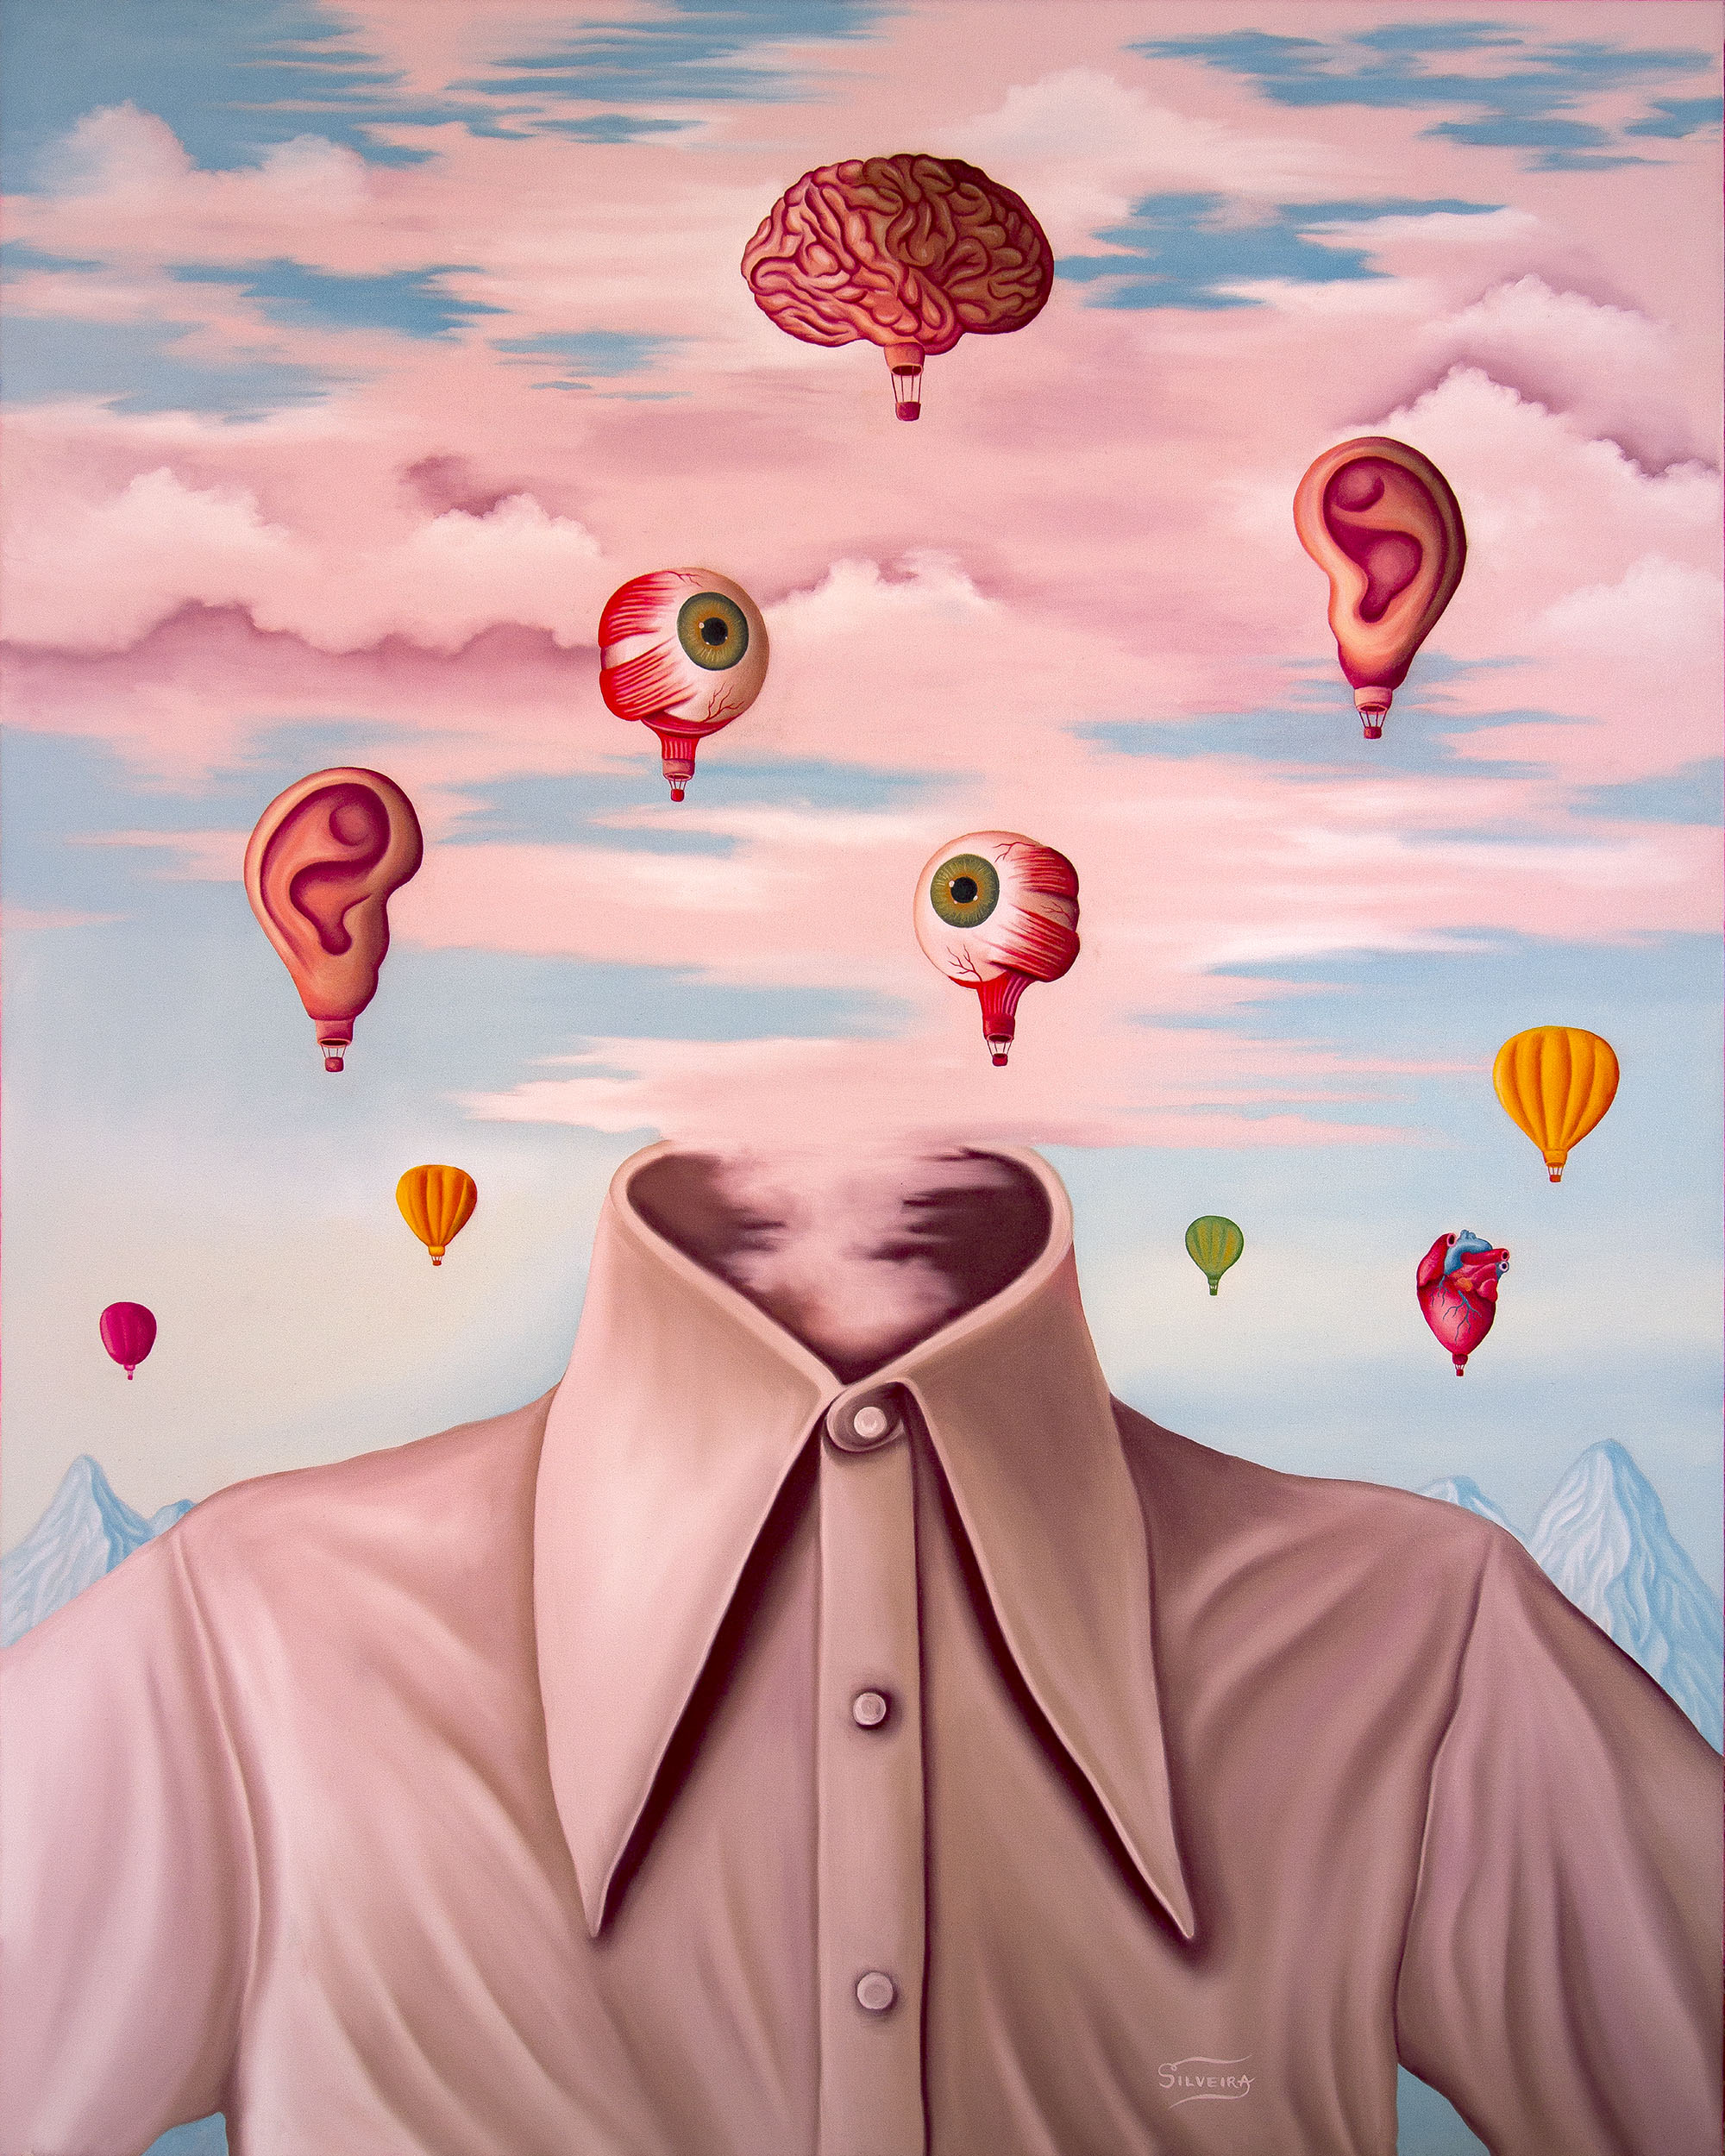 A vibrant and colorful portrait of a figure without a head, but instead two eyebals hovering above the rest of the body, like hot air balloons in the background